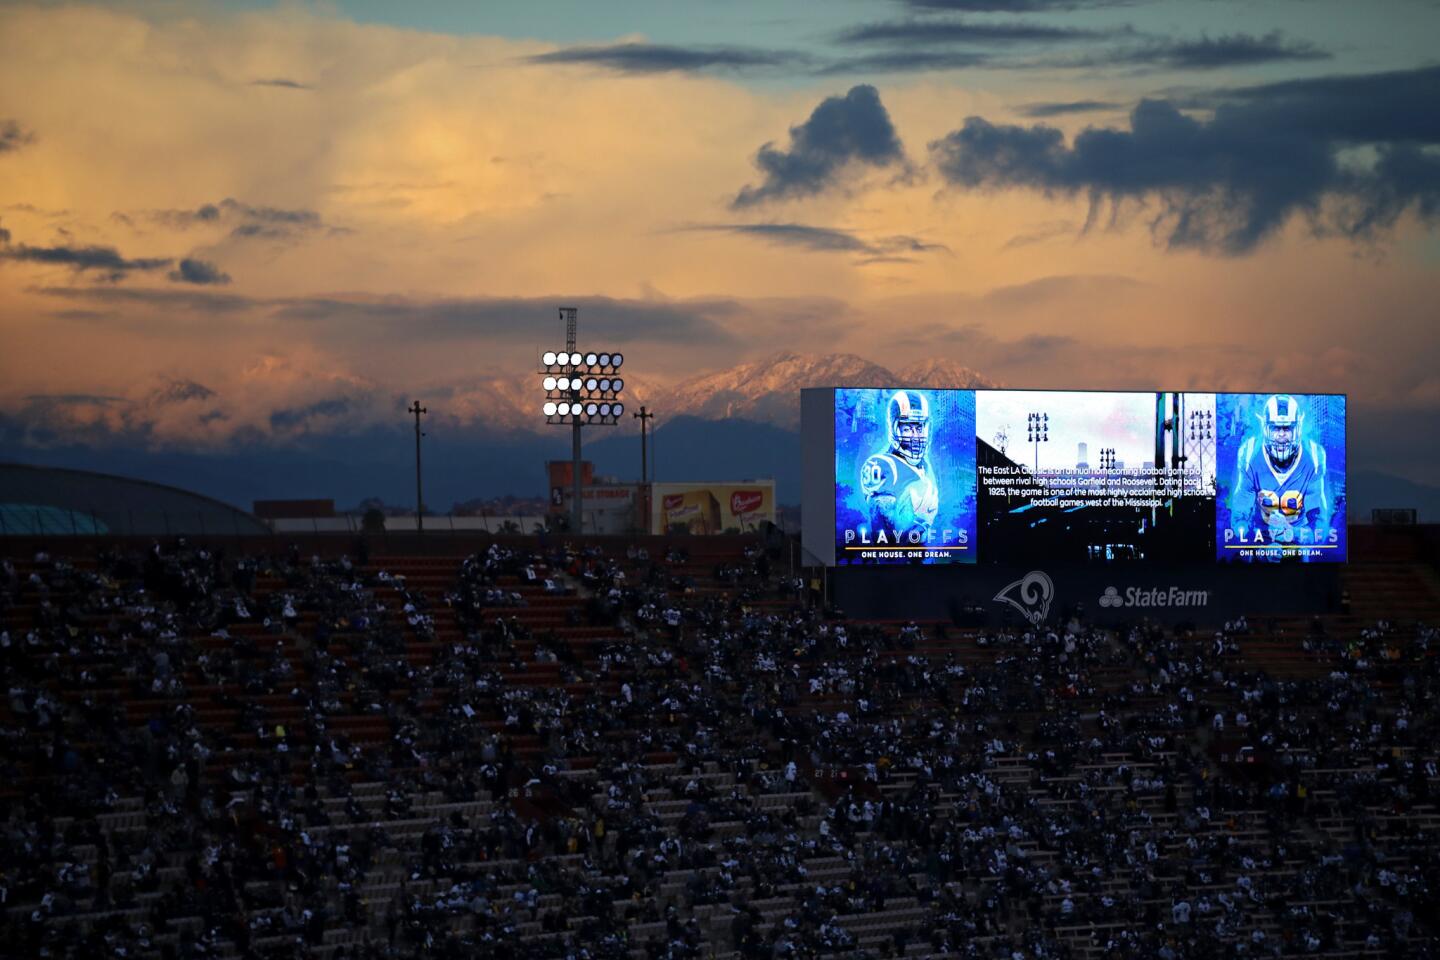 LOS ANGELES, CA - JANUARY 12: Mountains are seen from the stadium before the NFC Divisional Playoff game between the Los Angeles Rams and the Dallas Cowboys at Los Angeles Memorial Coliseum on January 12, 2019 in Los Angeles, California. (Photo by Sean M. Haffey/Getty Images) ** OUTS - ELSENT, FPG, CM - OUTS * NM, PH, VA if sourced by CT, LA or MoD **